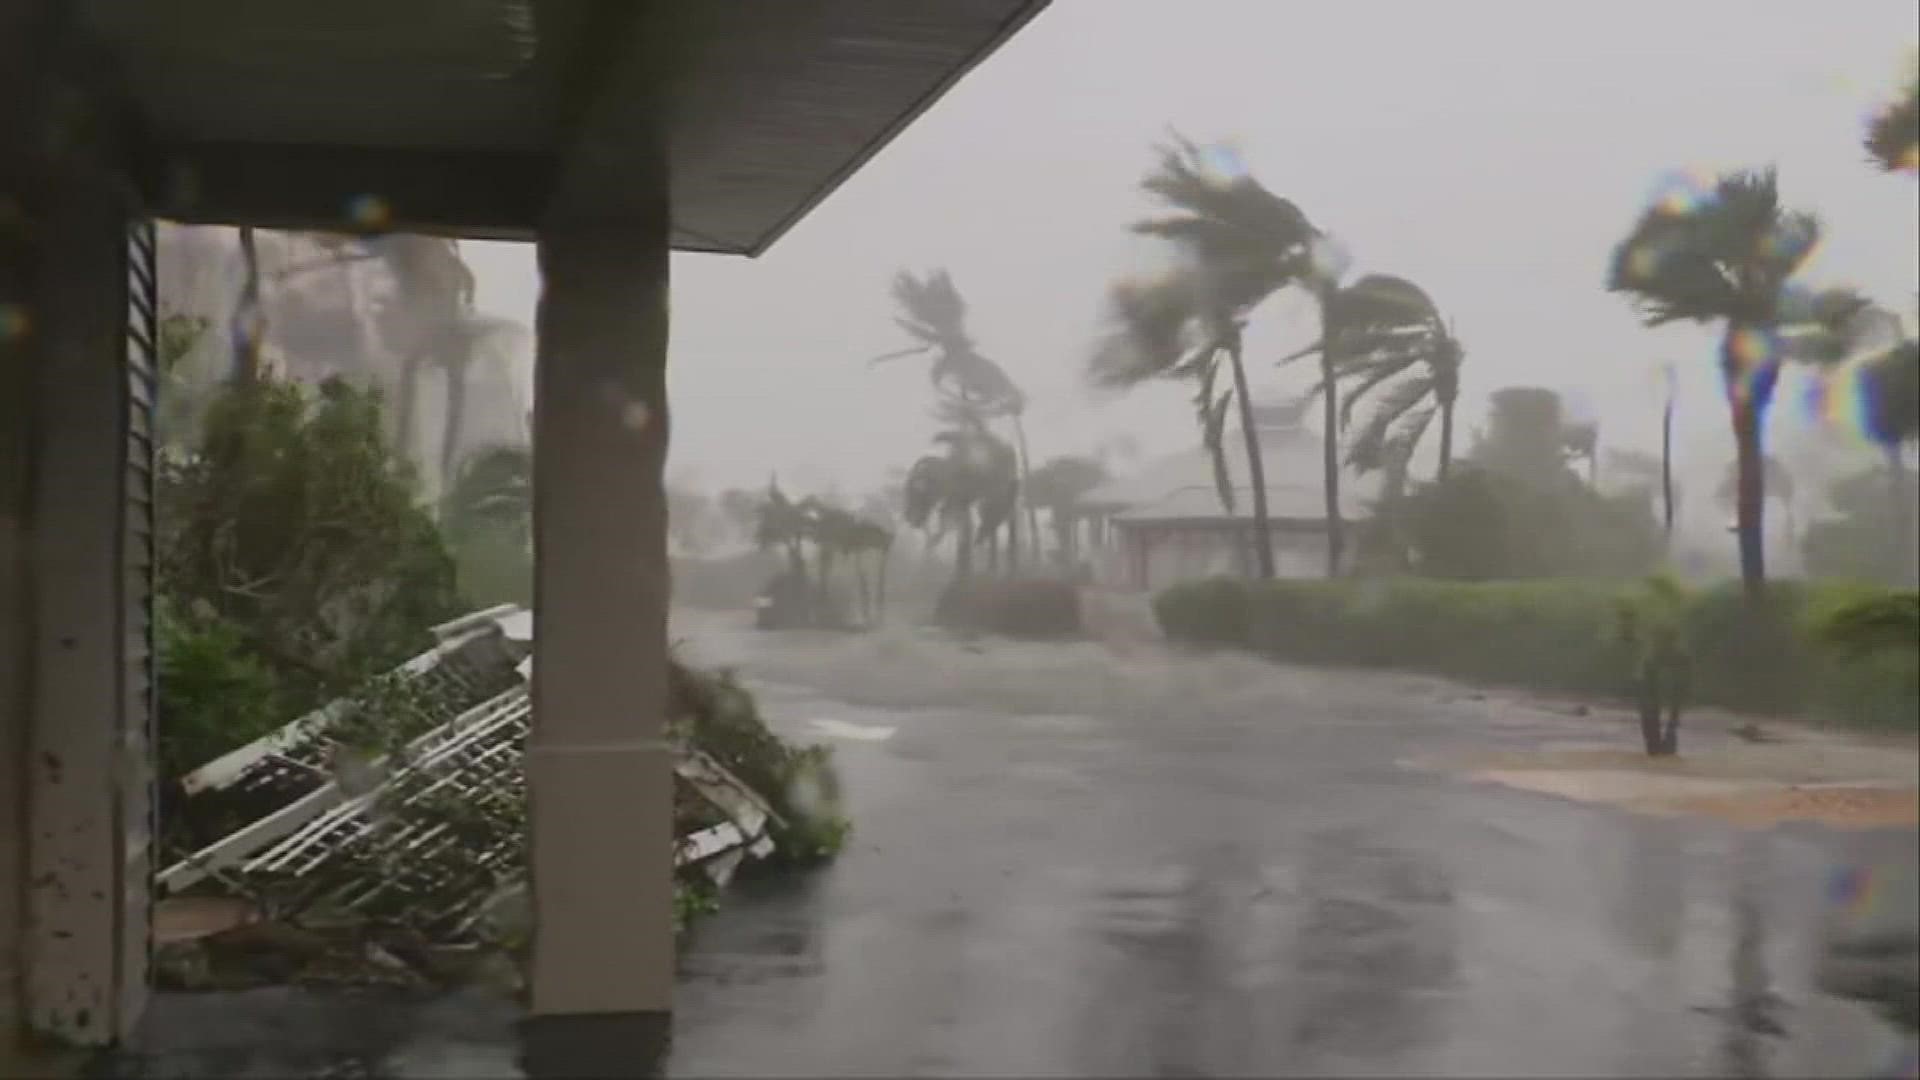 The question comes after Hurricane Ian devastated parts of Florida.